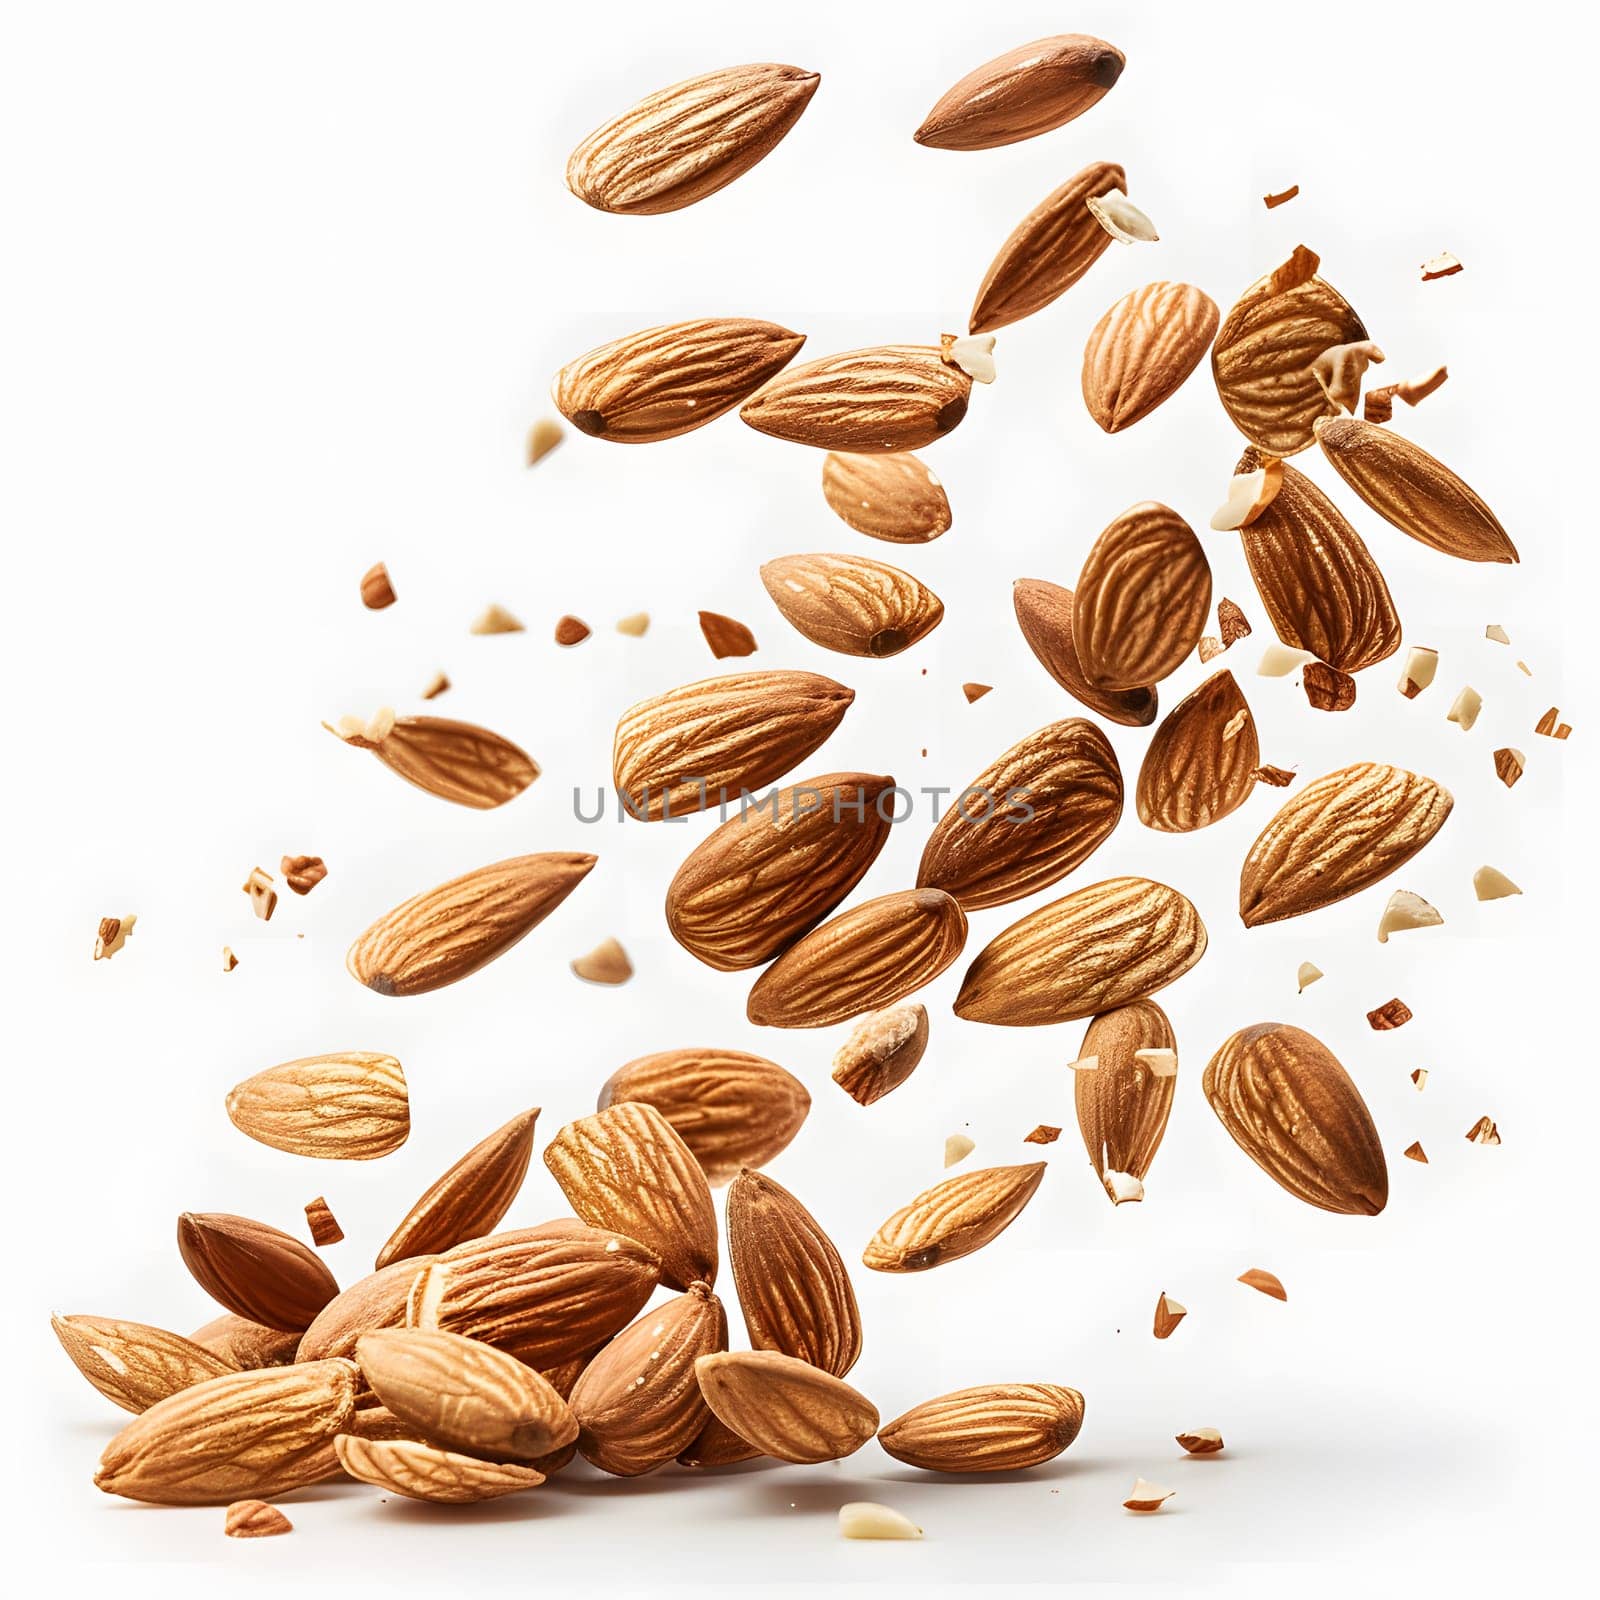 Almonds, a staple food ingredient in many cuisines, are falling into a pile on a white background. These nuts seeds come from the almond plant and are a popular produce at events